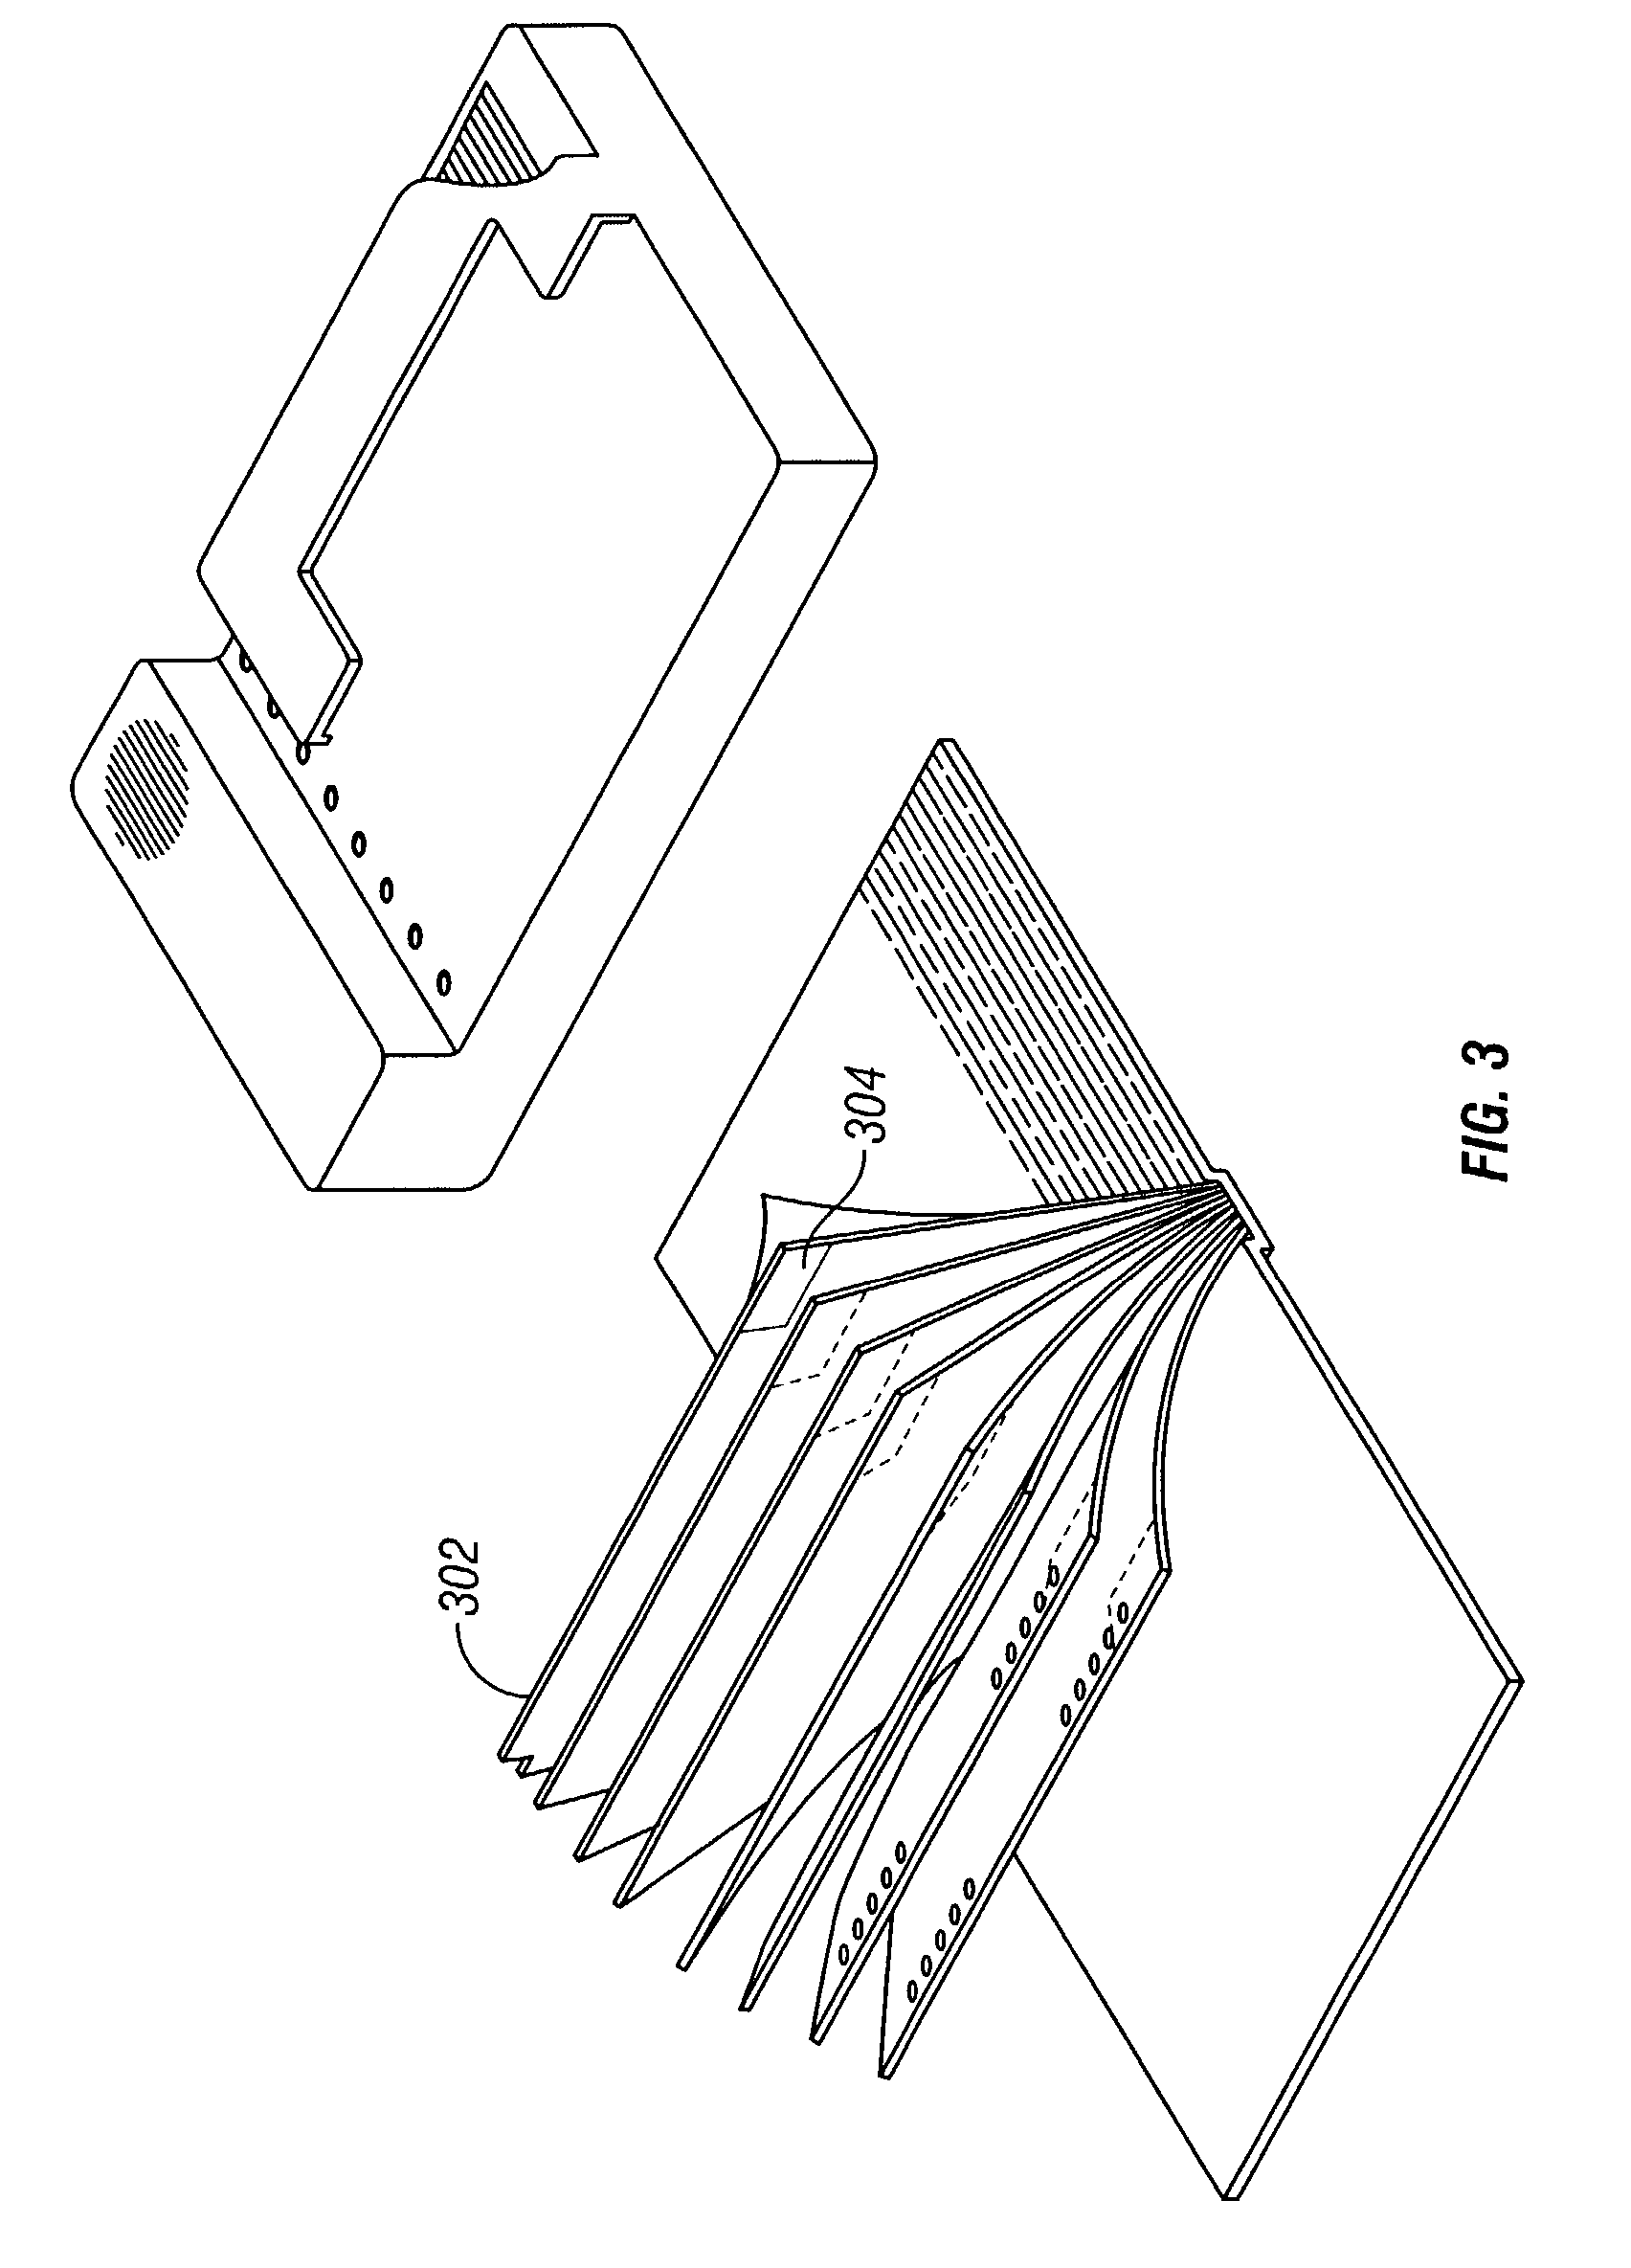 Method and system for illustrating sound and text